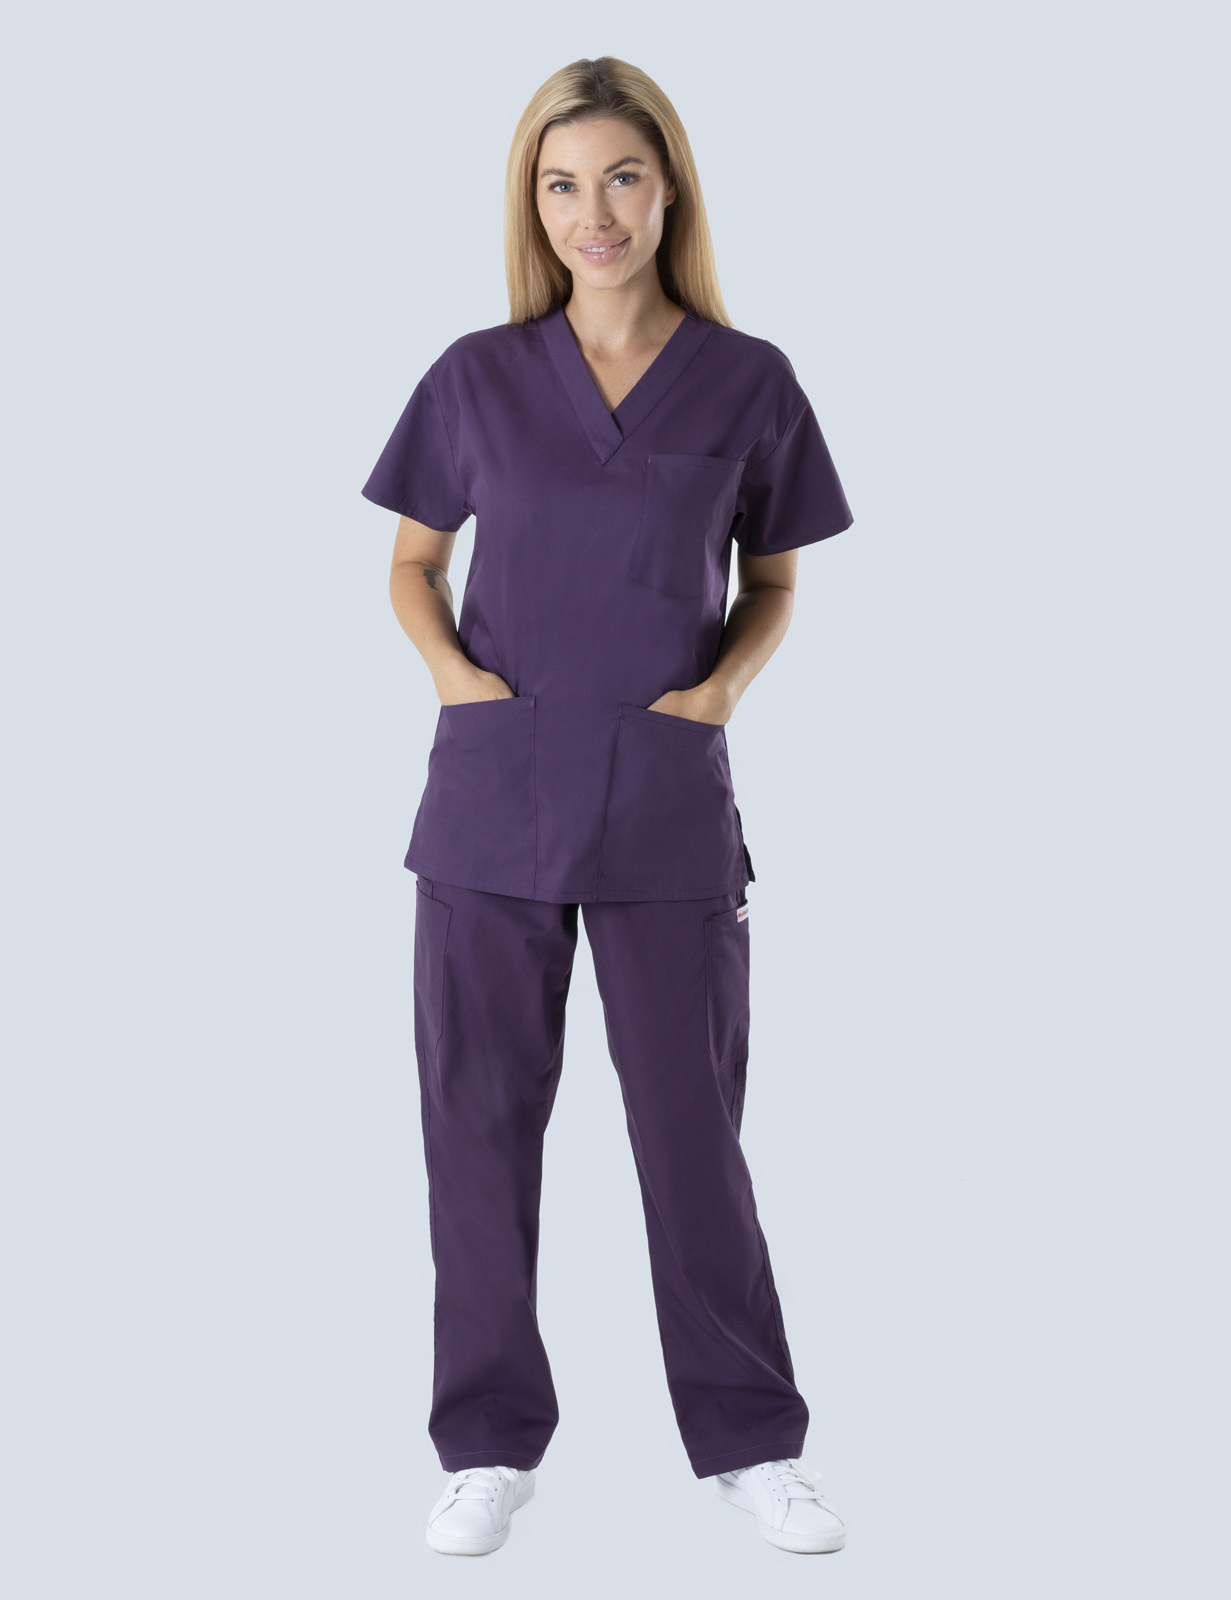 Caboolture Hospital - ED EN (4 Pocket Scrub Top and Cargo Pants in Aubergine incl Logos)